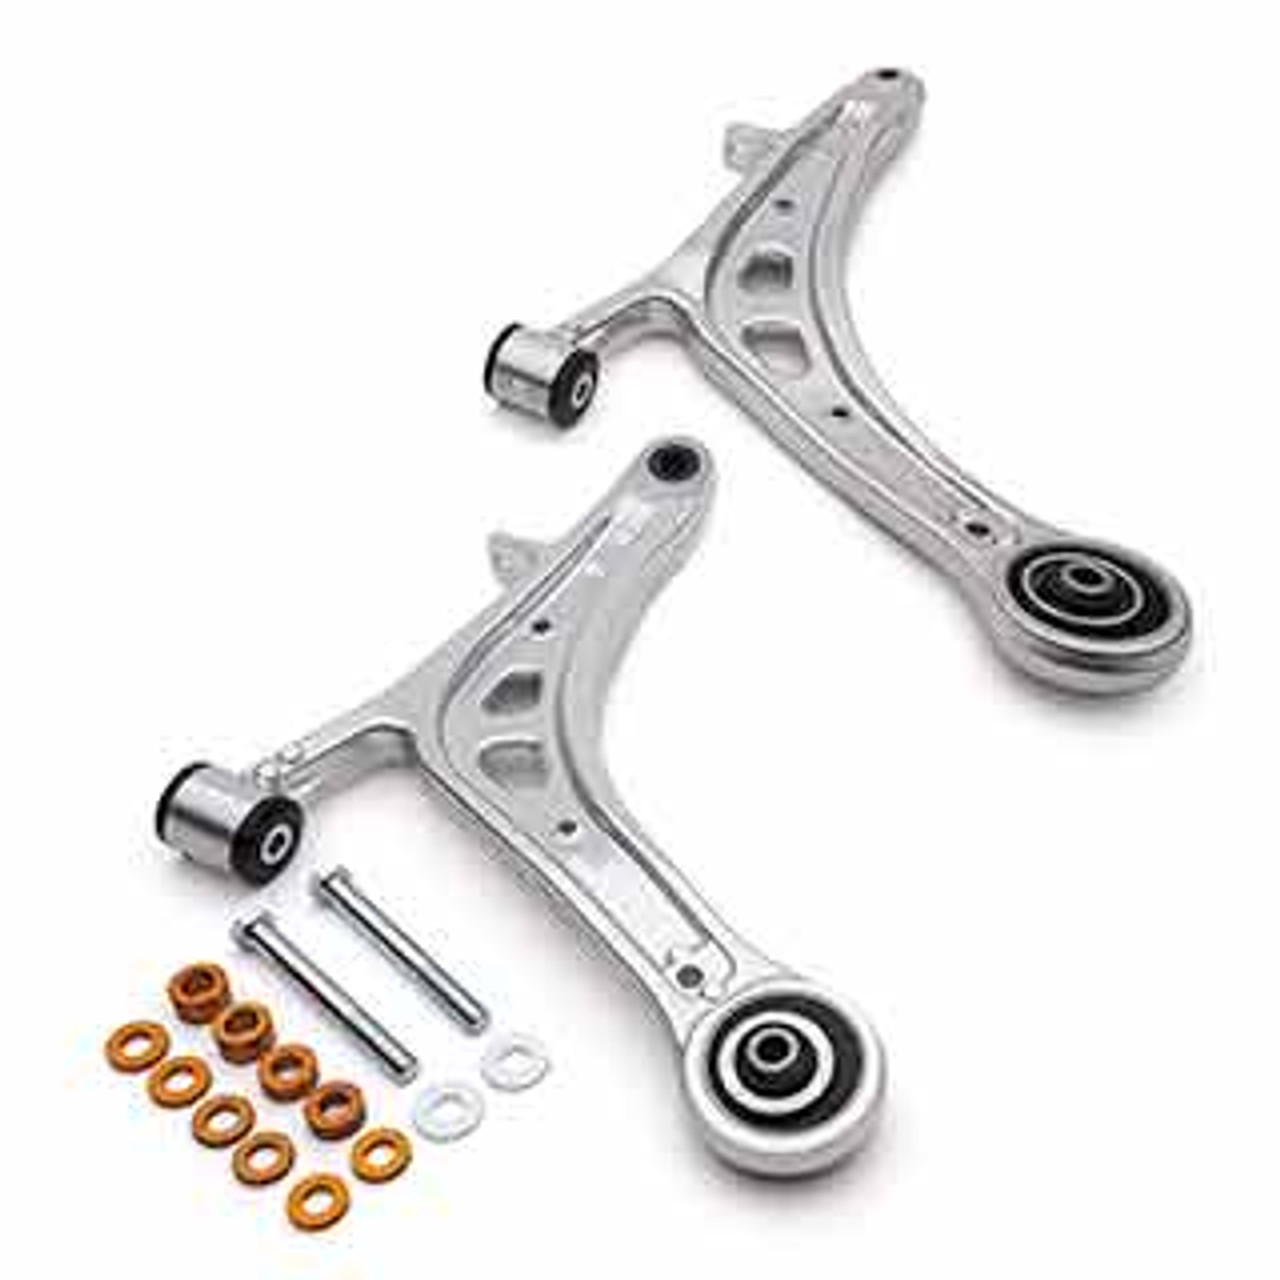 SUBARU COMPETITION READY SUSPENSION PACKAGE - ALLOY FRONT LOWER CONTROL ARM (COMPLETE), OFFSET CASTER